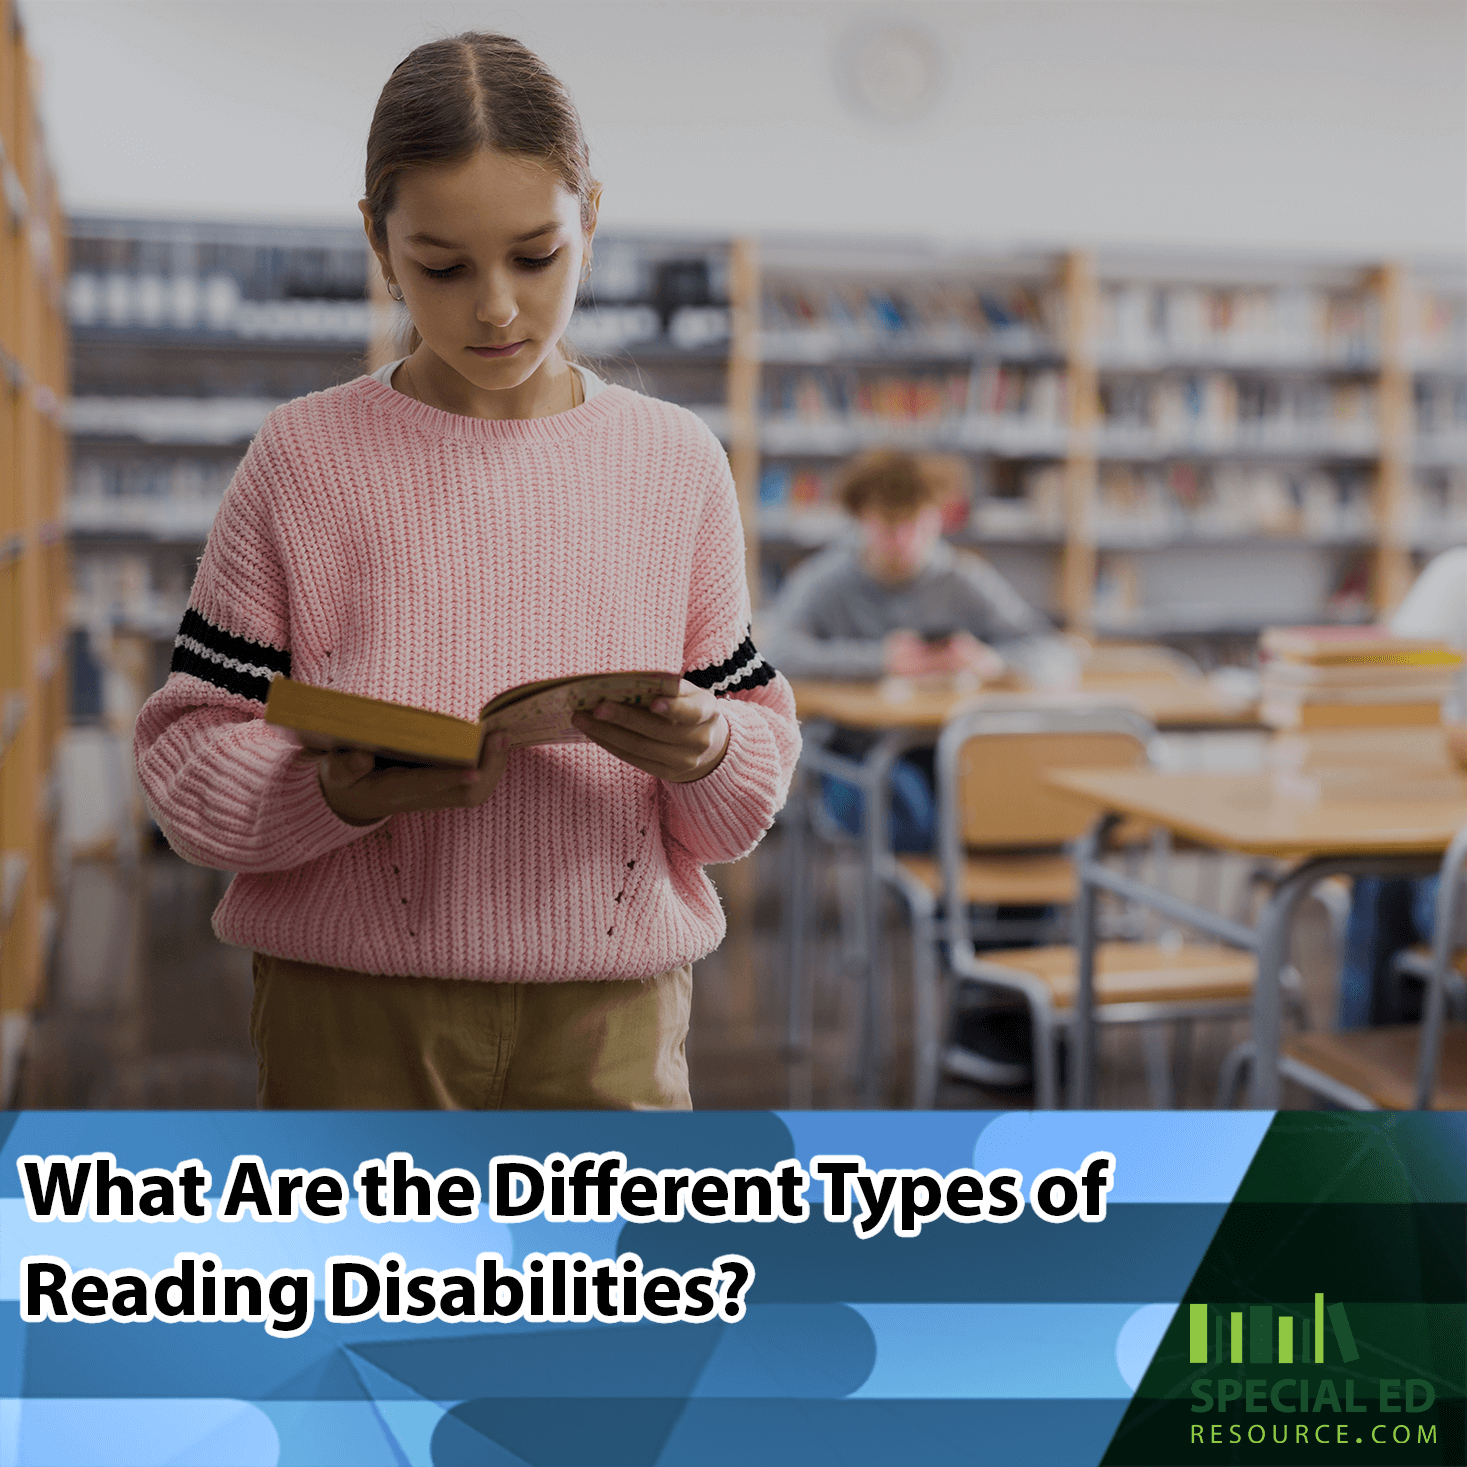 Girl standing in school library looking down at a book. She may have one of these 5 types of reading disabilities.